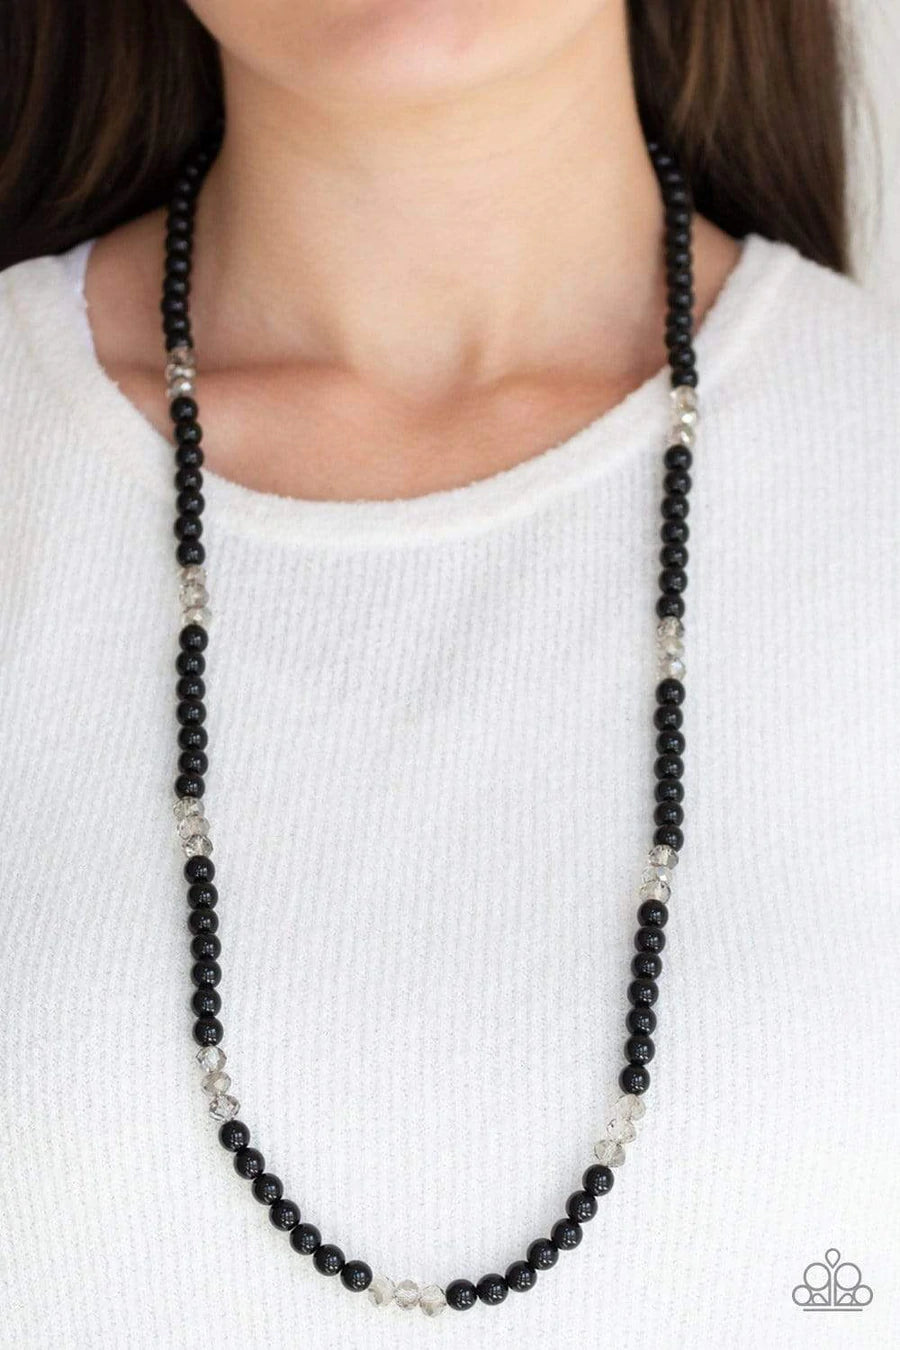 Paparazzi “Girls Have More Funds” Black Shiny Bead Necklace